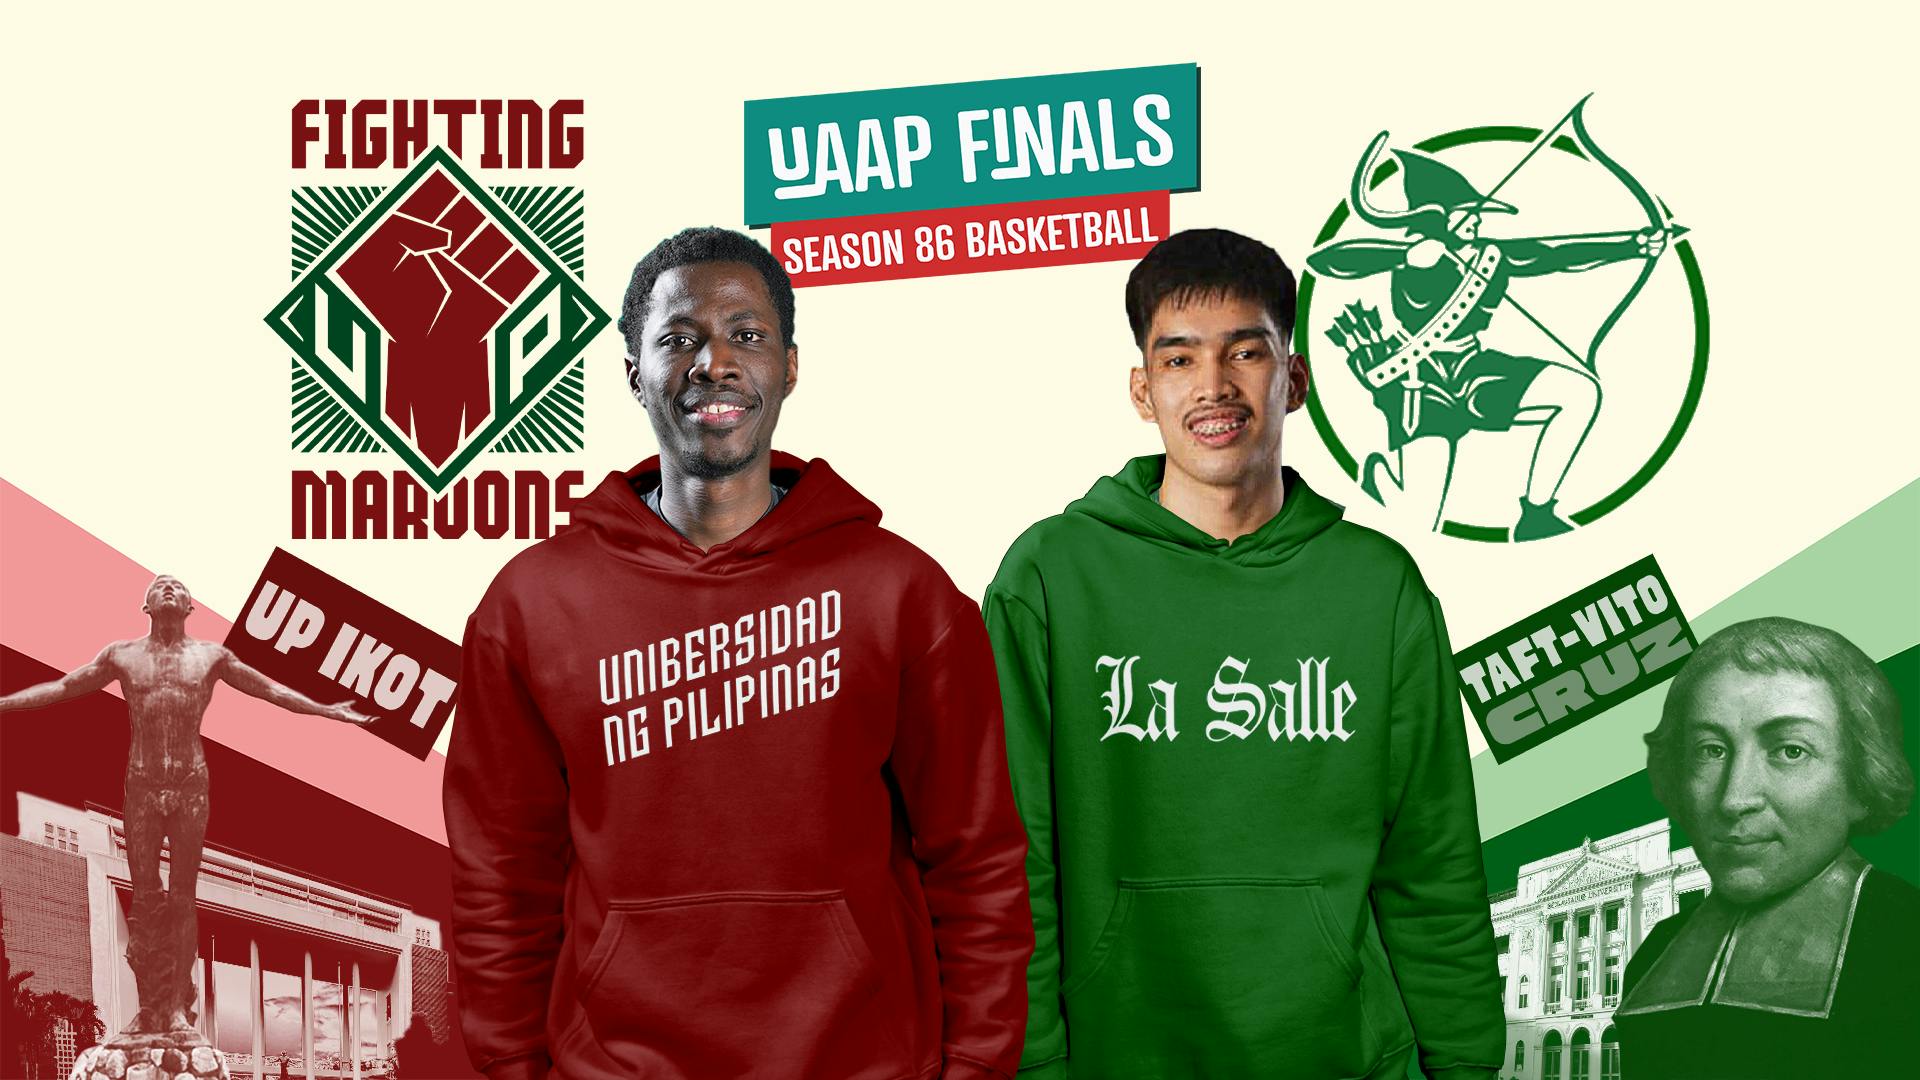 The incredibly worthless, most pointless, and very disjointed UAAP finals super mega preview